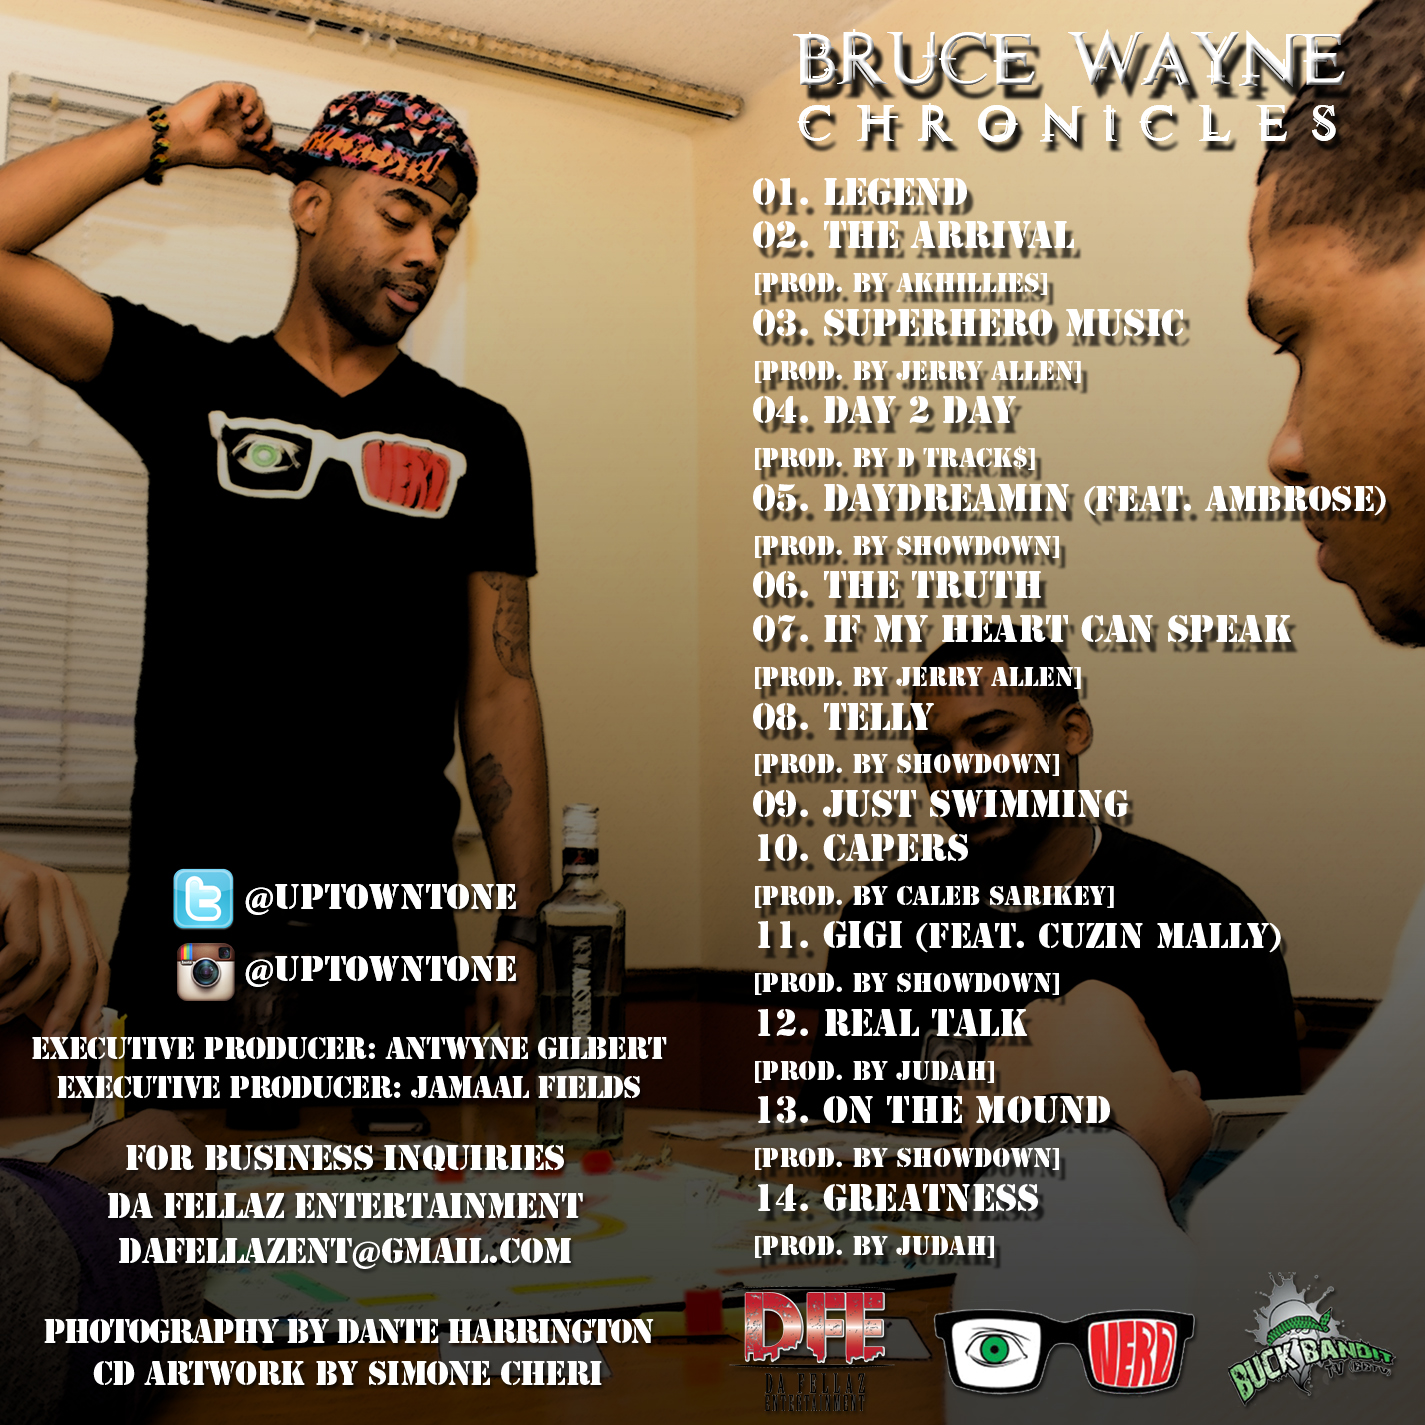 uptown-tone-bruce-wayne-chronicles-mixtape-HHS1987-2012-TRACKLIST Uptown Tone (@UptownTone) - Bruce Wayne Chronicles (Mixtape) + Telly (Official Video)  